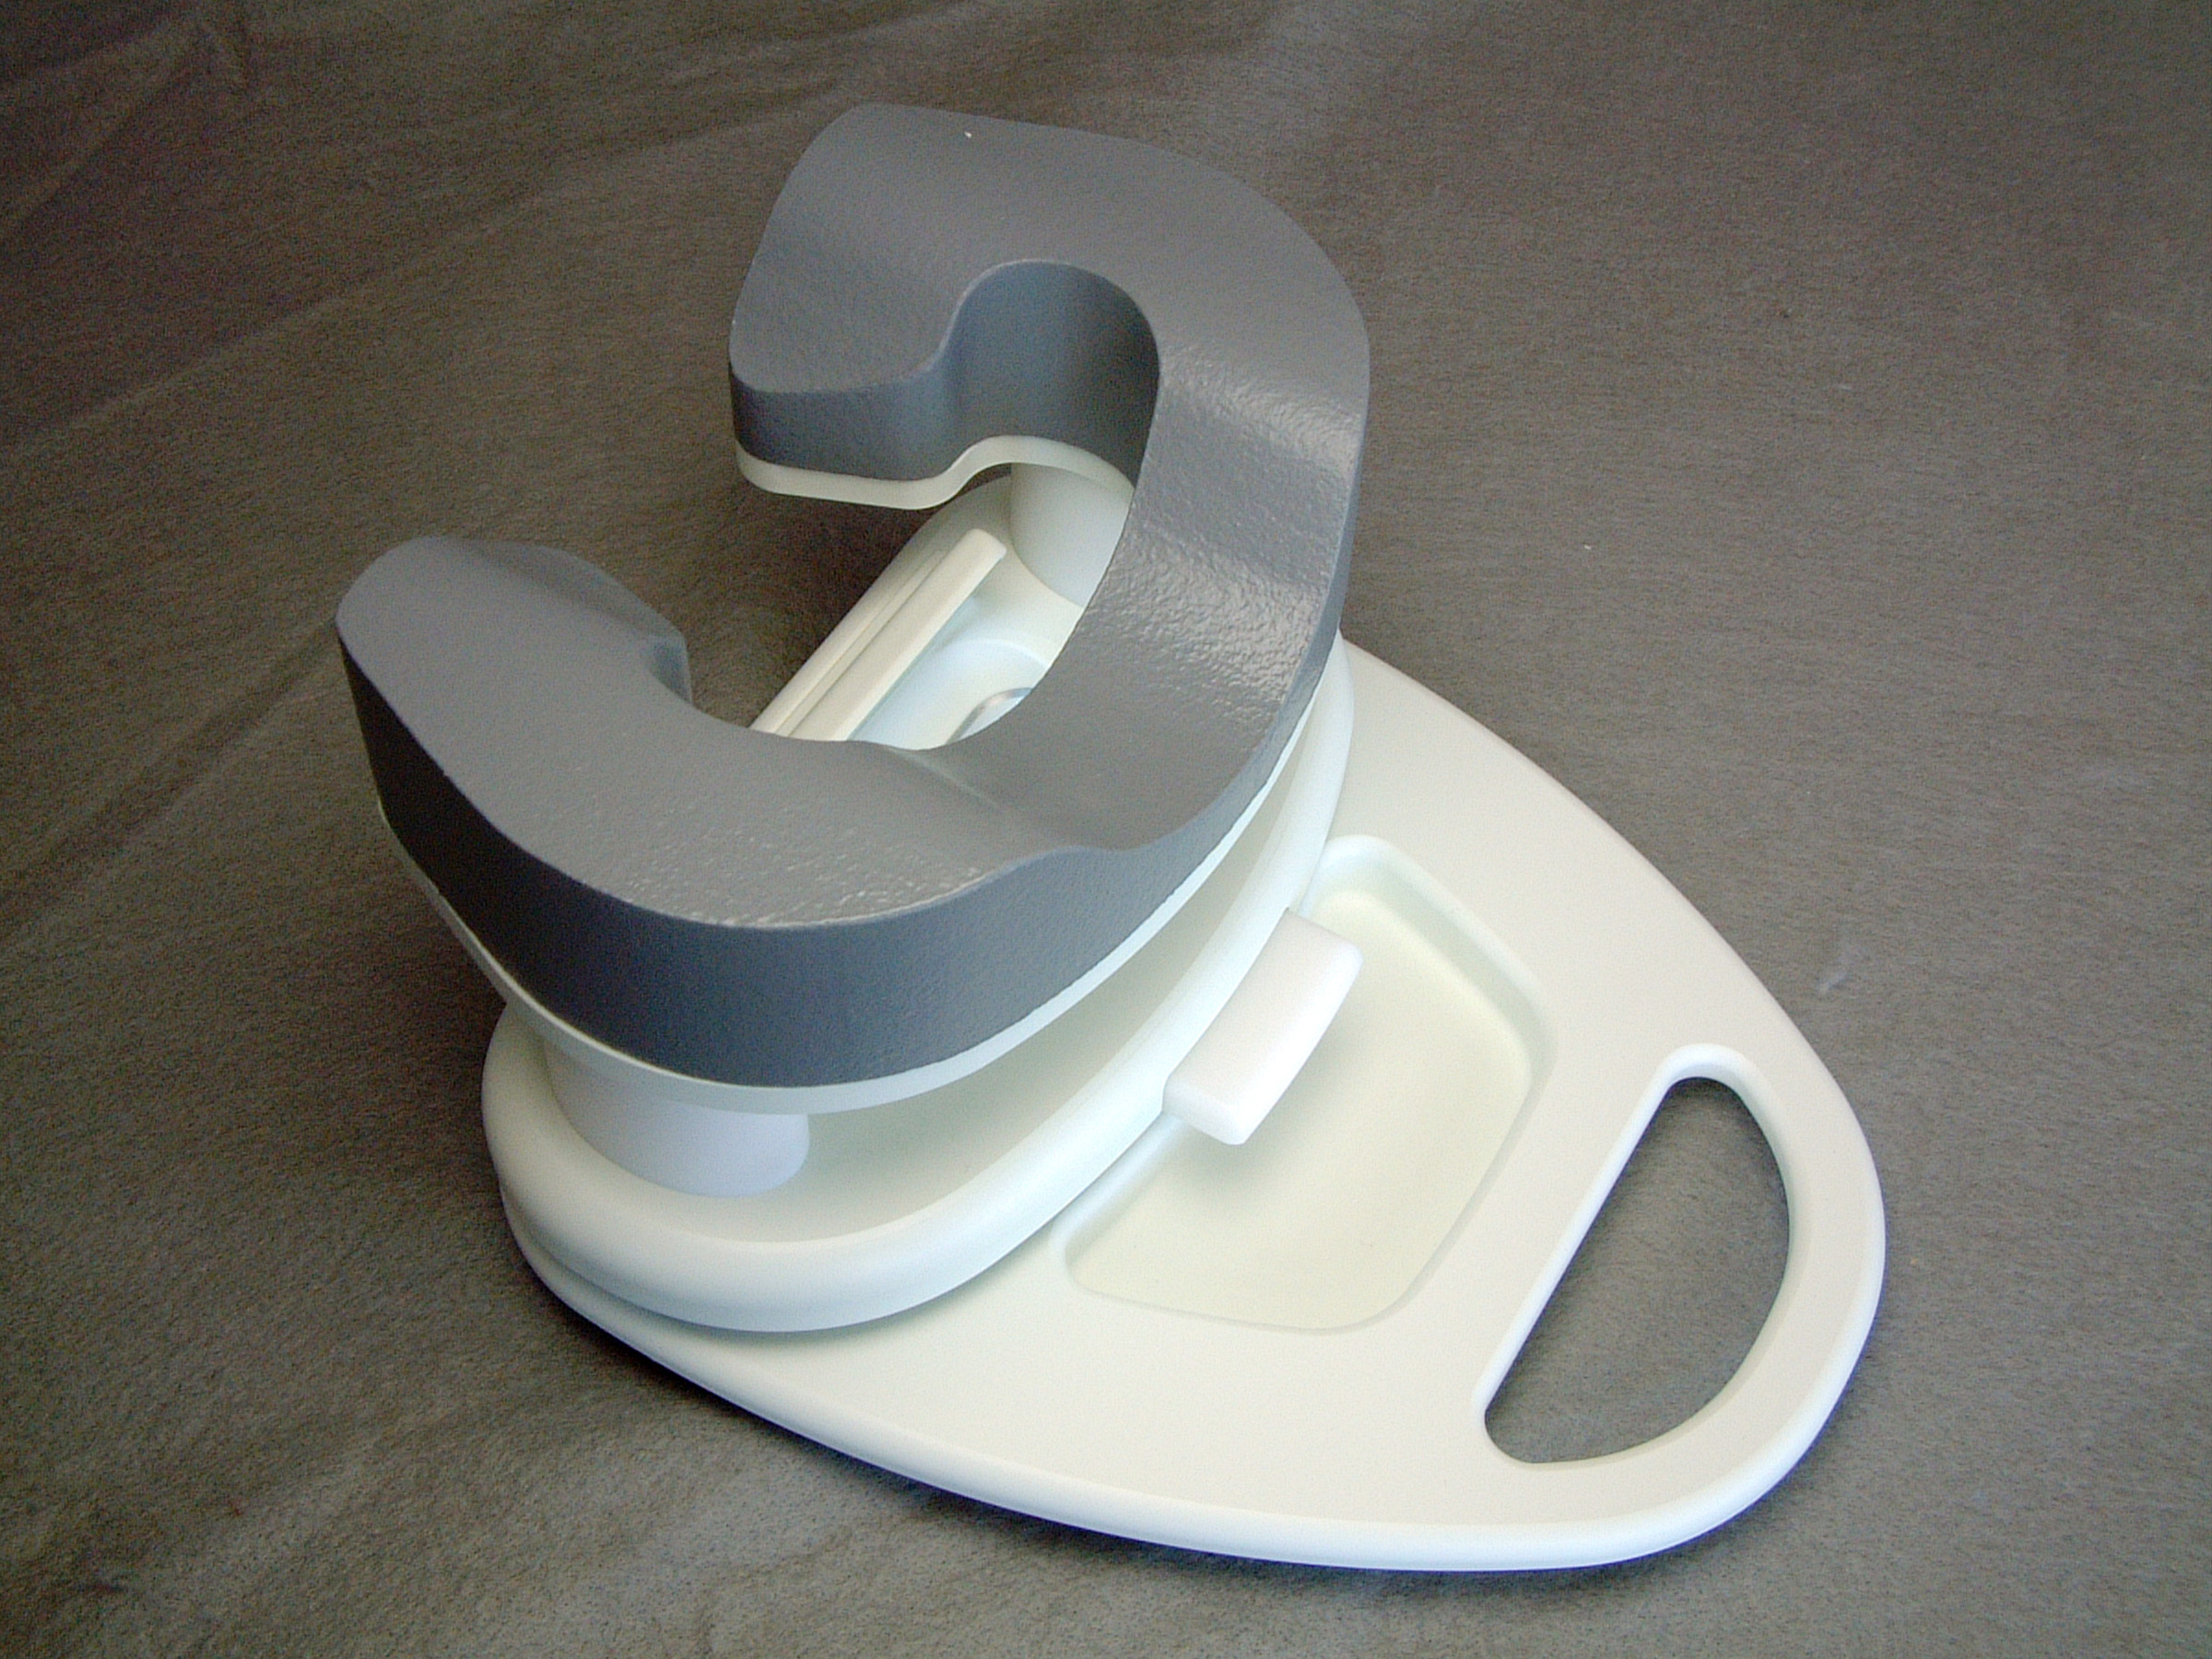 Adjustable Head Rest for 7-Channel Breast Coil